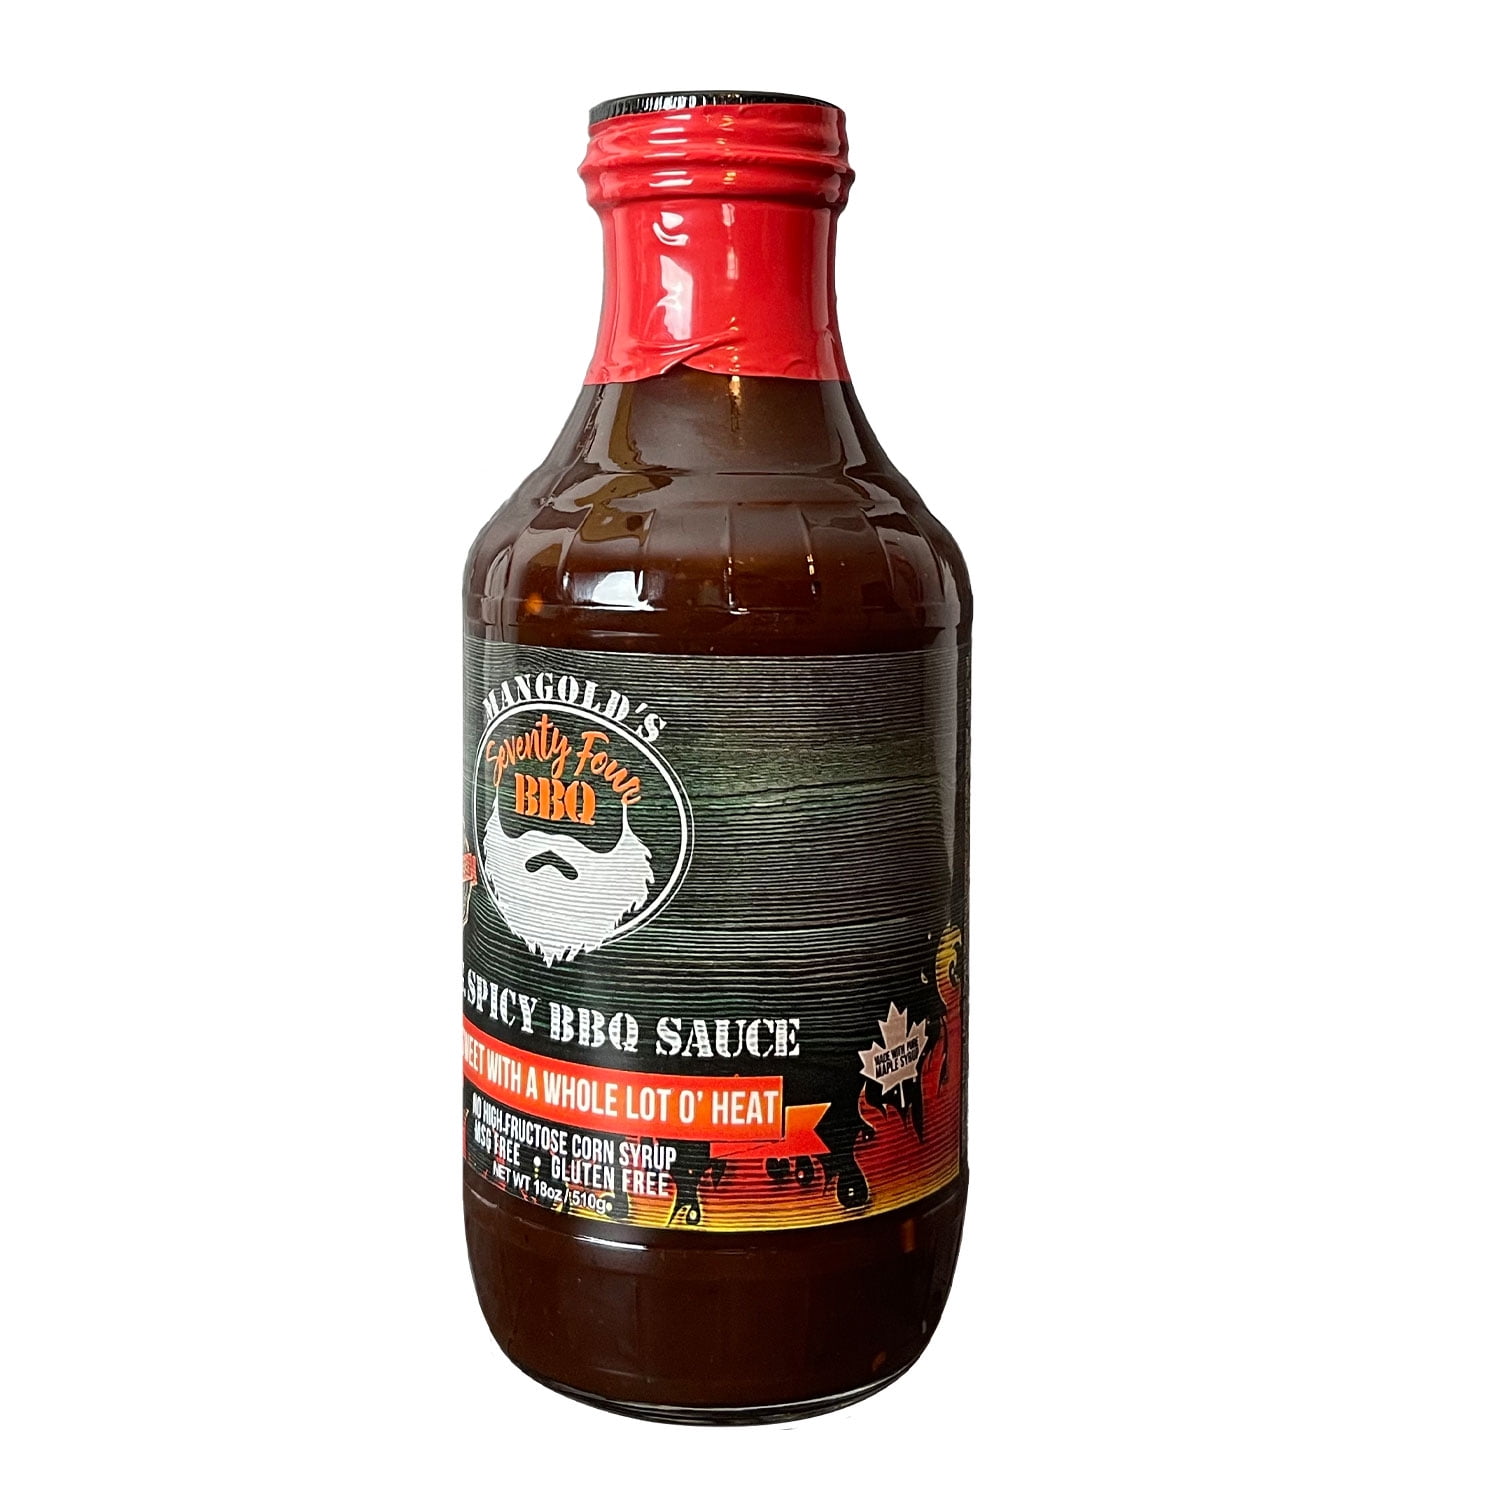 BBQ Sauce 18 Oz, Little Sweet with A Whole Lot Of Heat, 74 BBQ Mangold\'s  O.G, Small Batch Barbeque sauce perfect for grill, chicken, pork, beef,  ribs and chips.